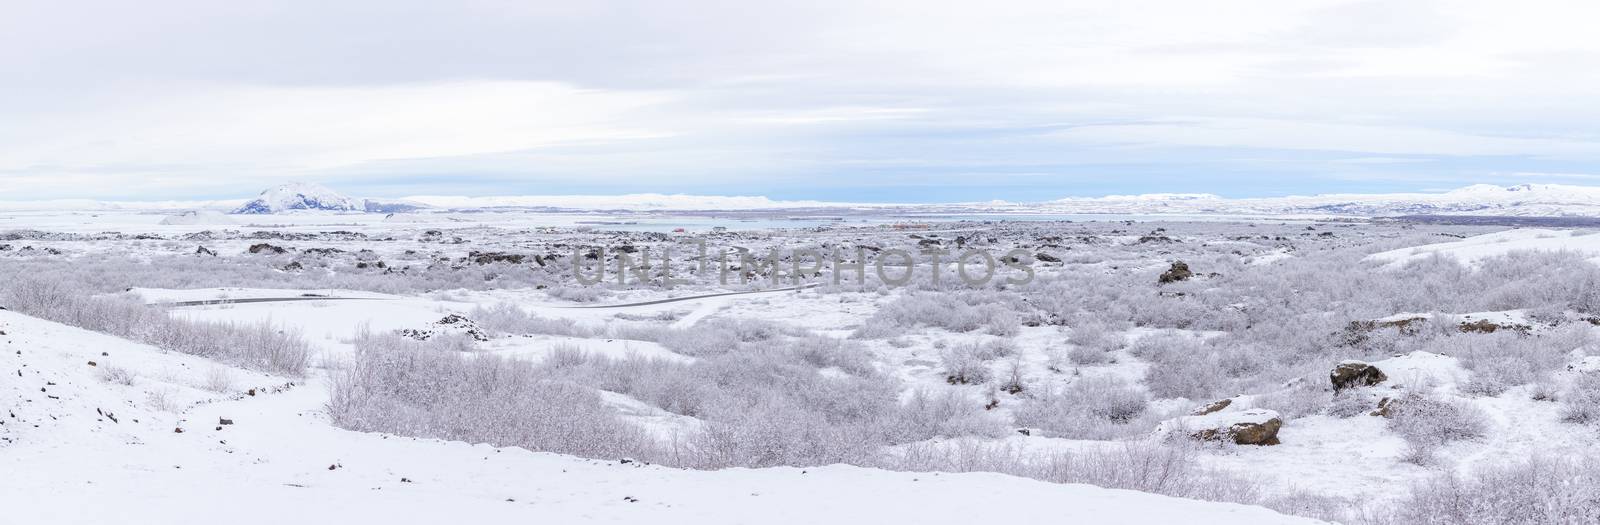 Winter landscape Iceland Panorama by vichie81